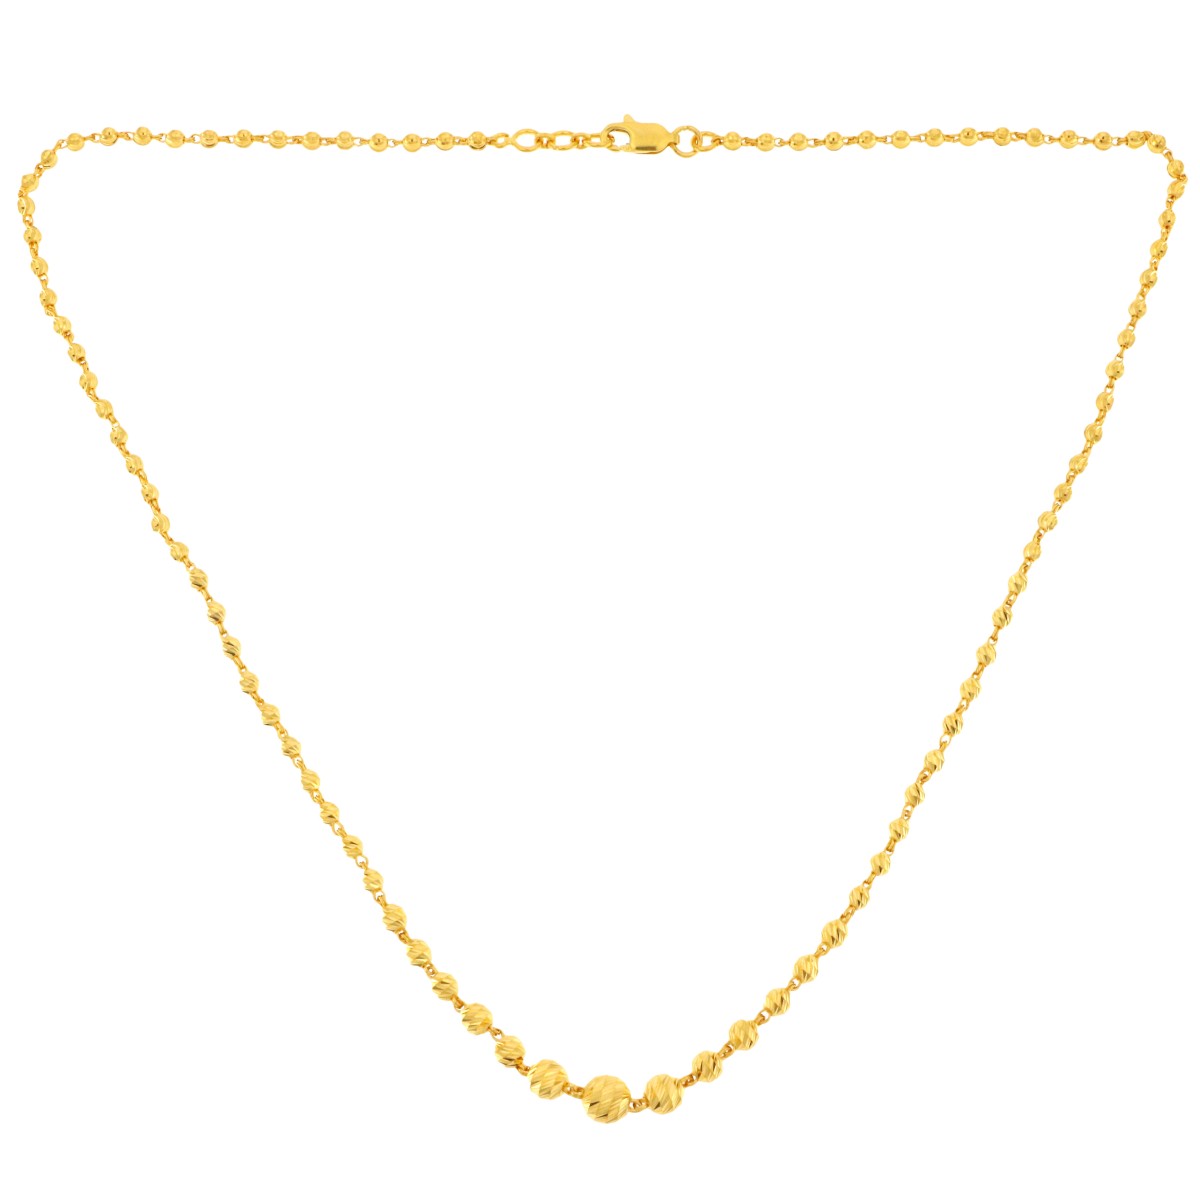 22ct Gold Mala/Necklace